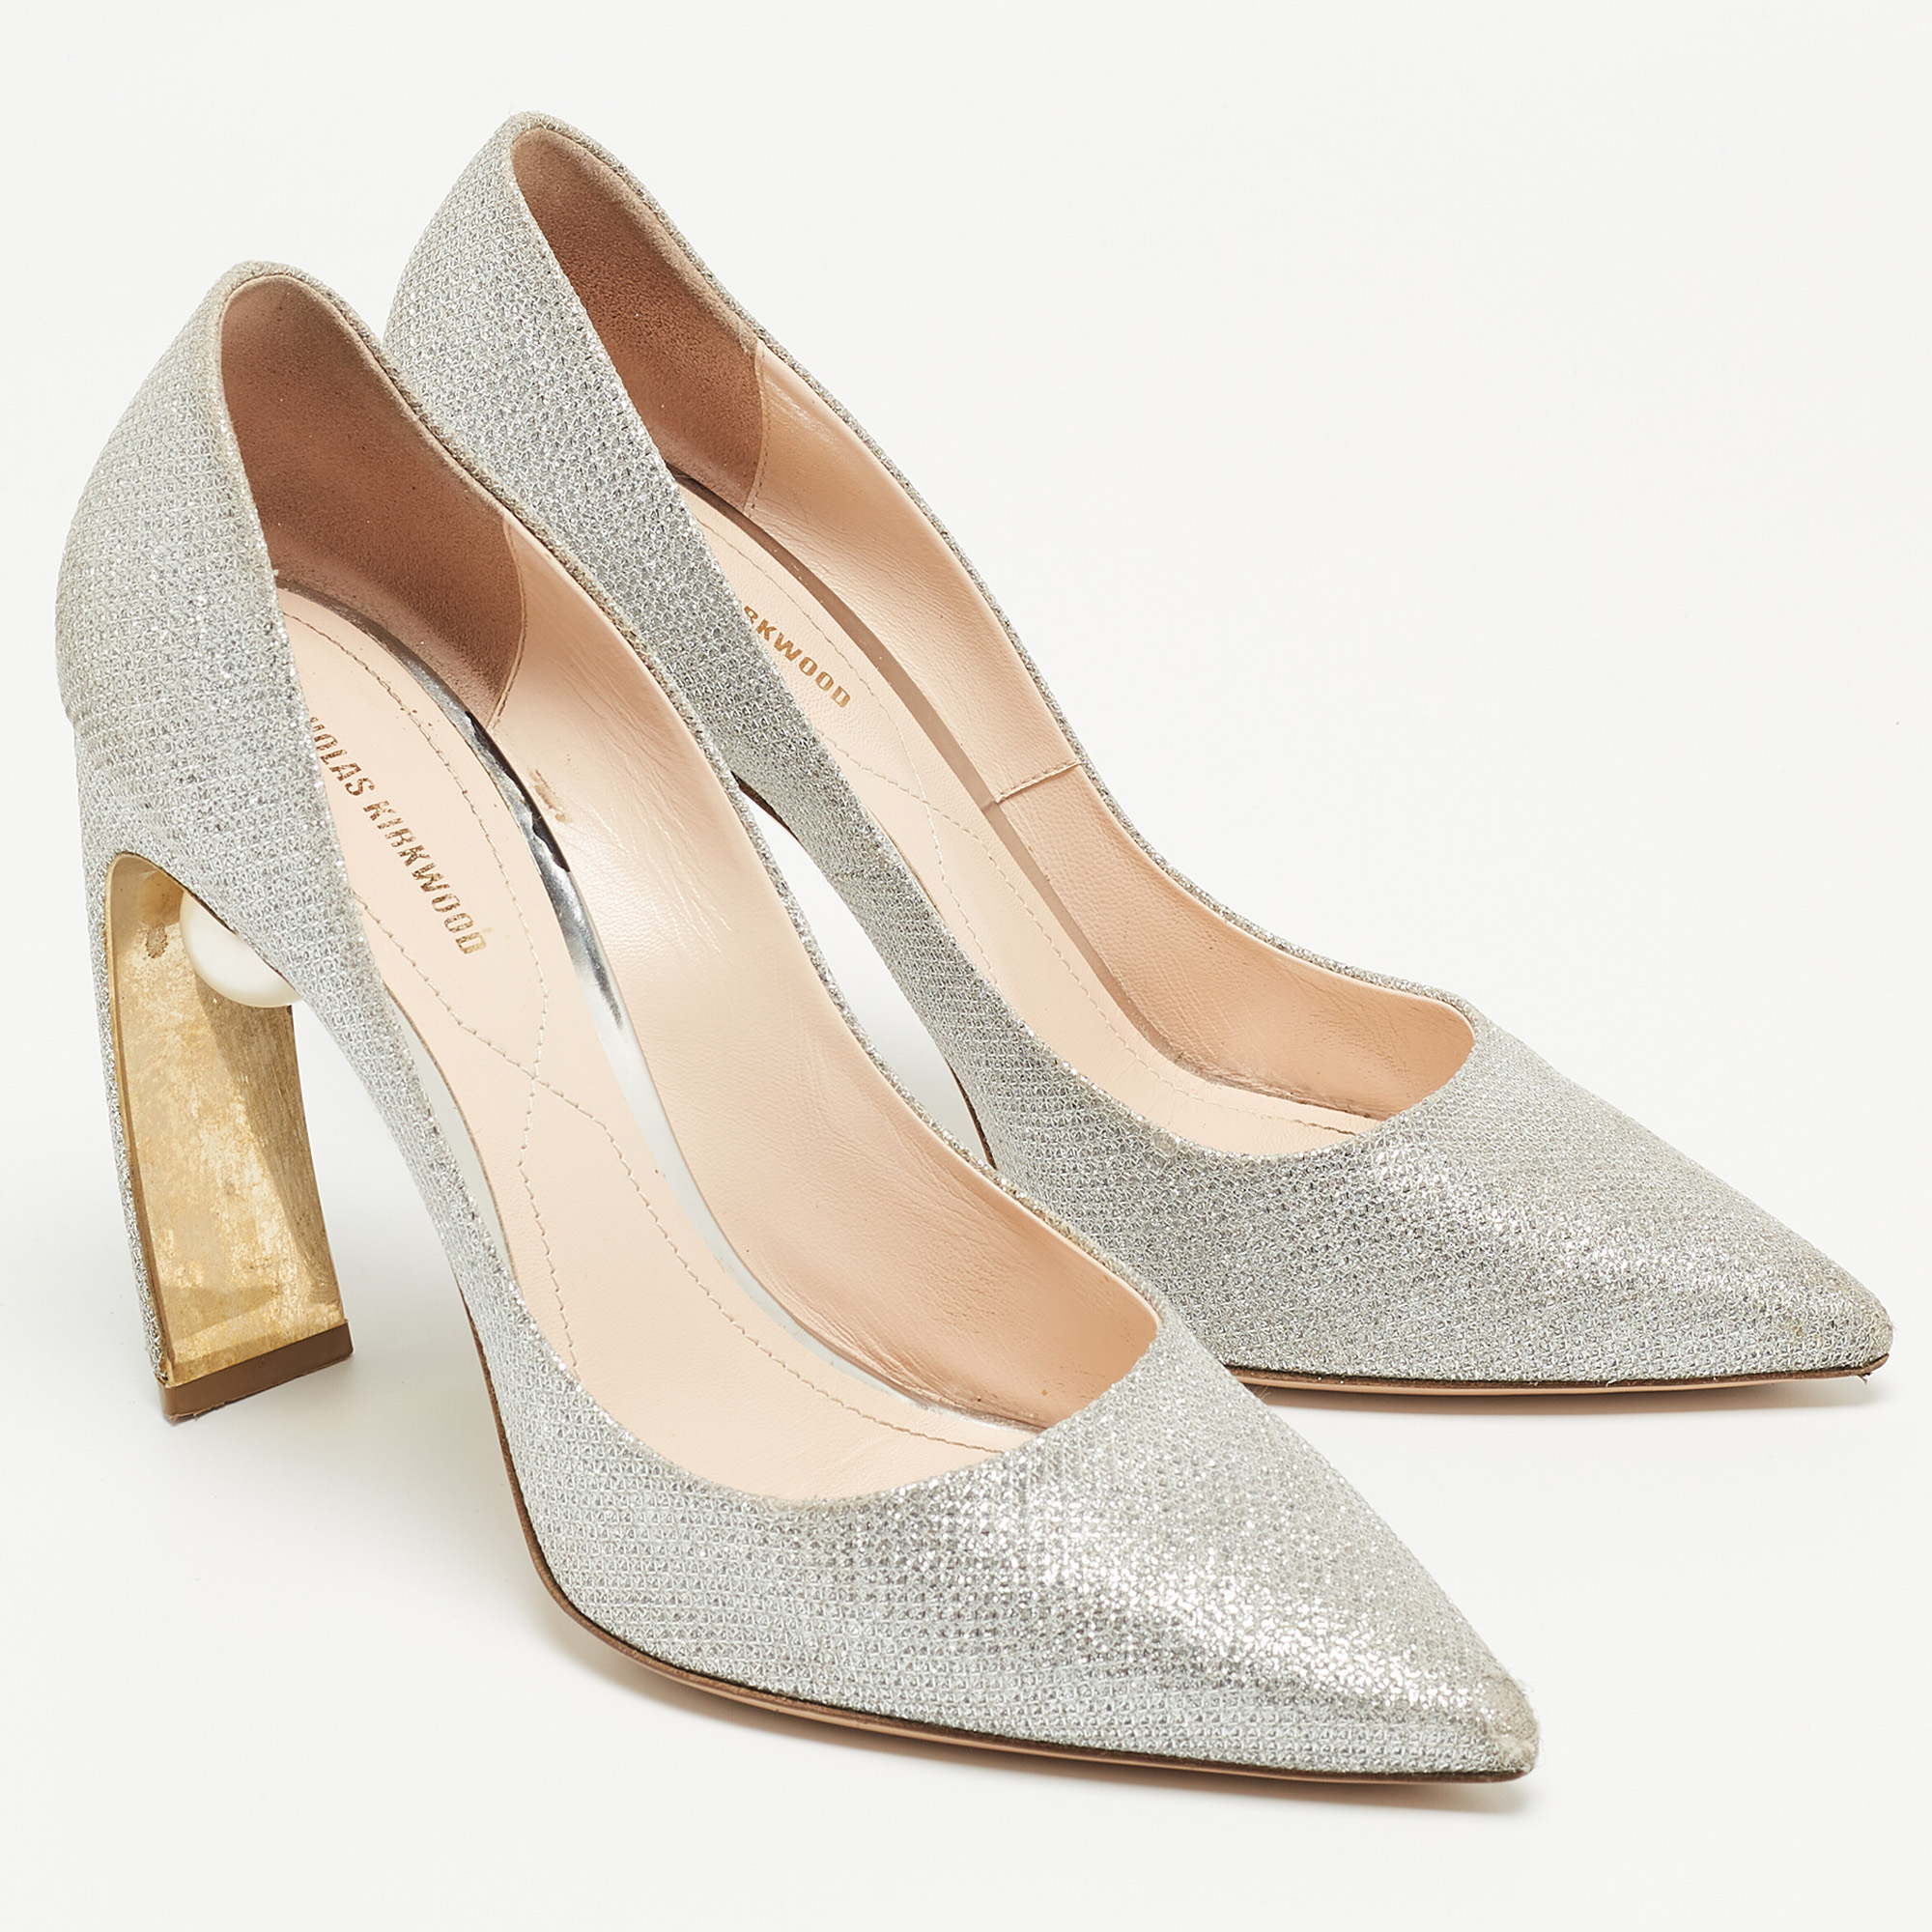 Nicholas Kirkwood Silver Glitter Lace Pearl Embellished Pointed Toe Pumps Size 40